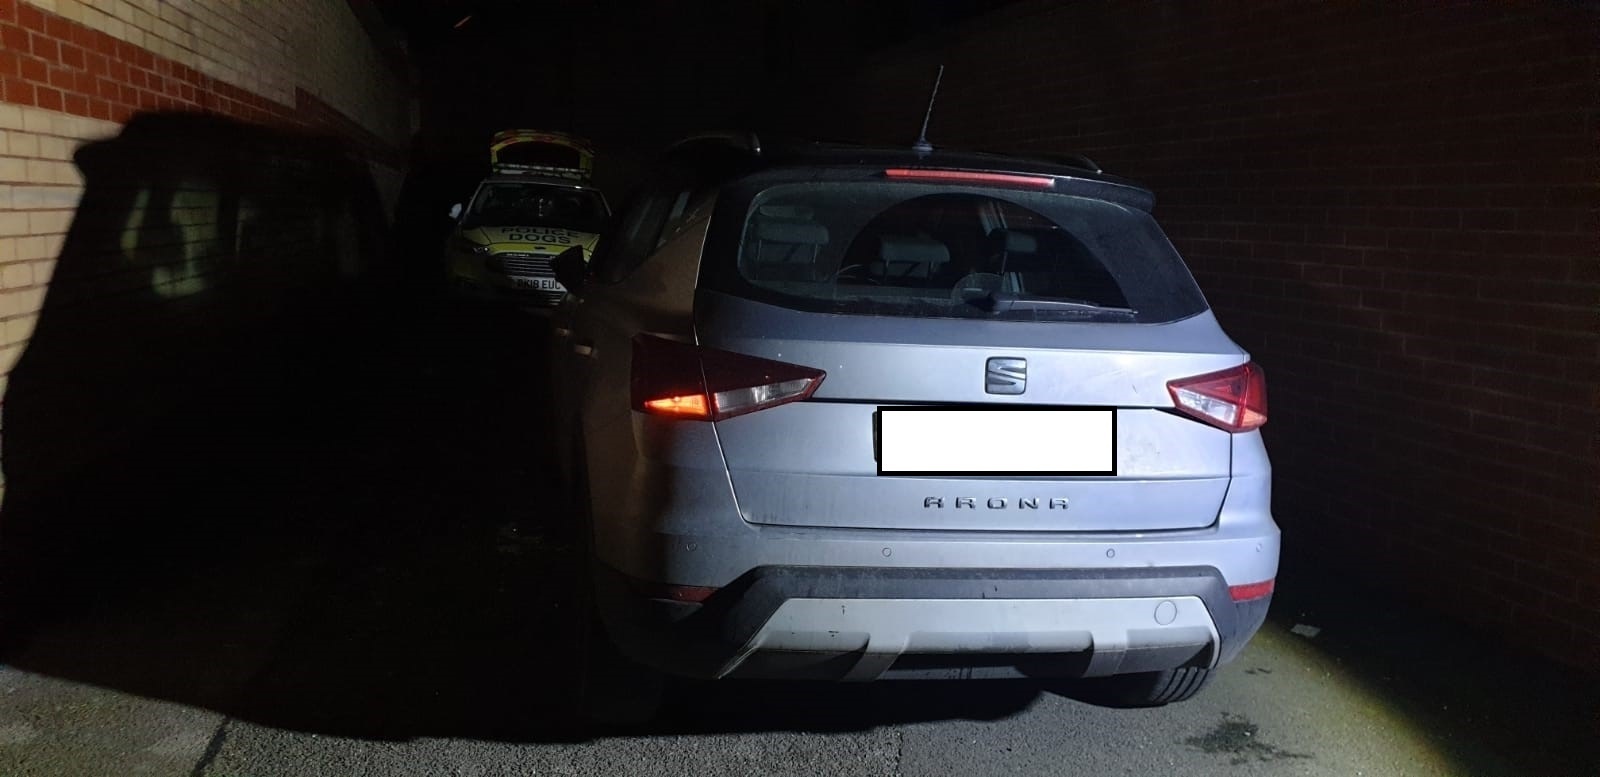 One of the cars that were seized. Picture: NWP Roads Policing Unit/Twitter